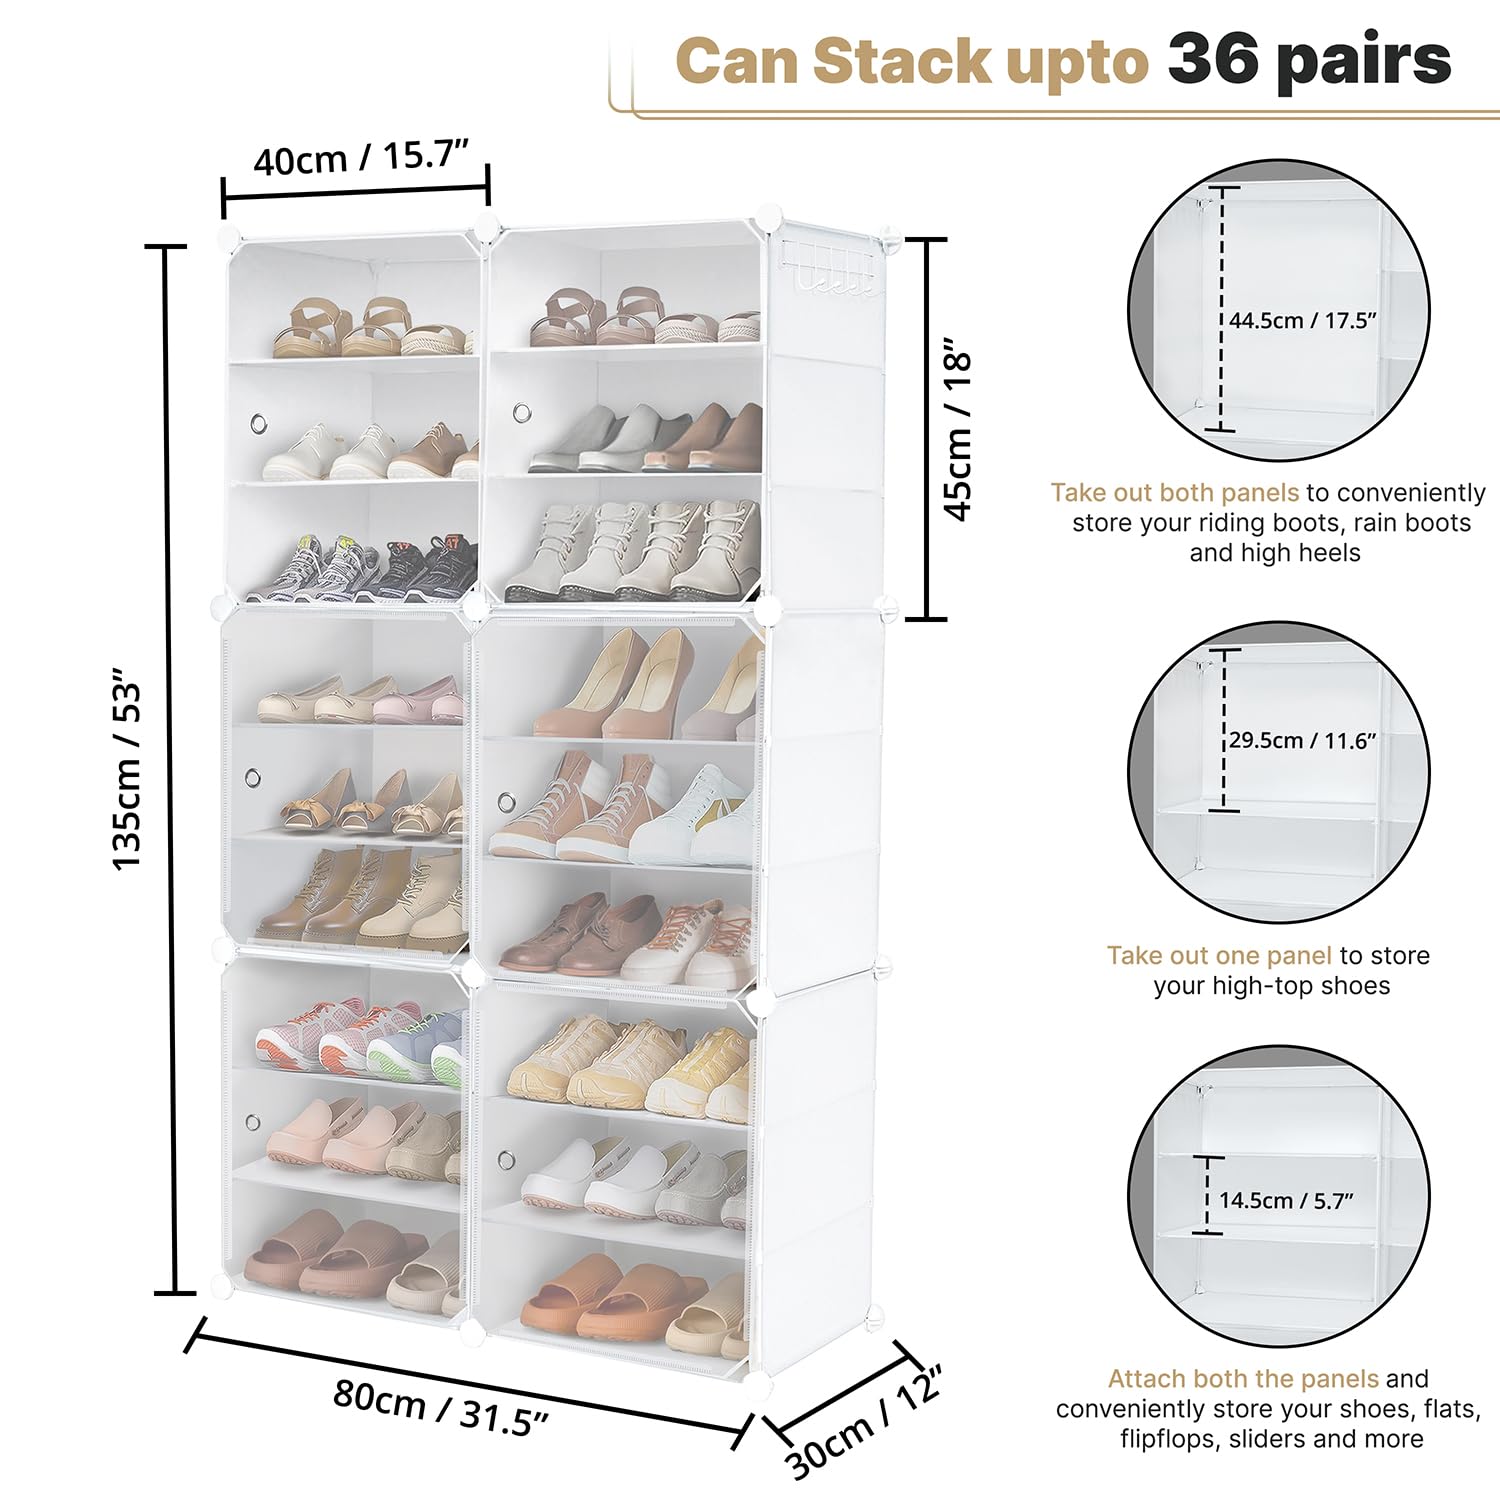 12 Pair DIY Shoe Rack for Home with Door & Hanger - Portable Shoe Stand - 3 Cube Expandable Shelves - Shoe Cabinet for Balcony, Men, Women,Heels,Boots,Loafers, Sneakers,Slippers